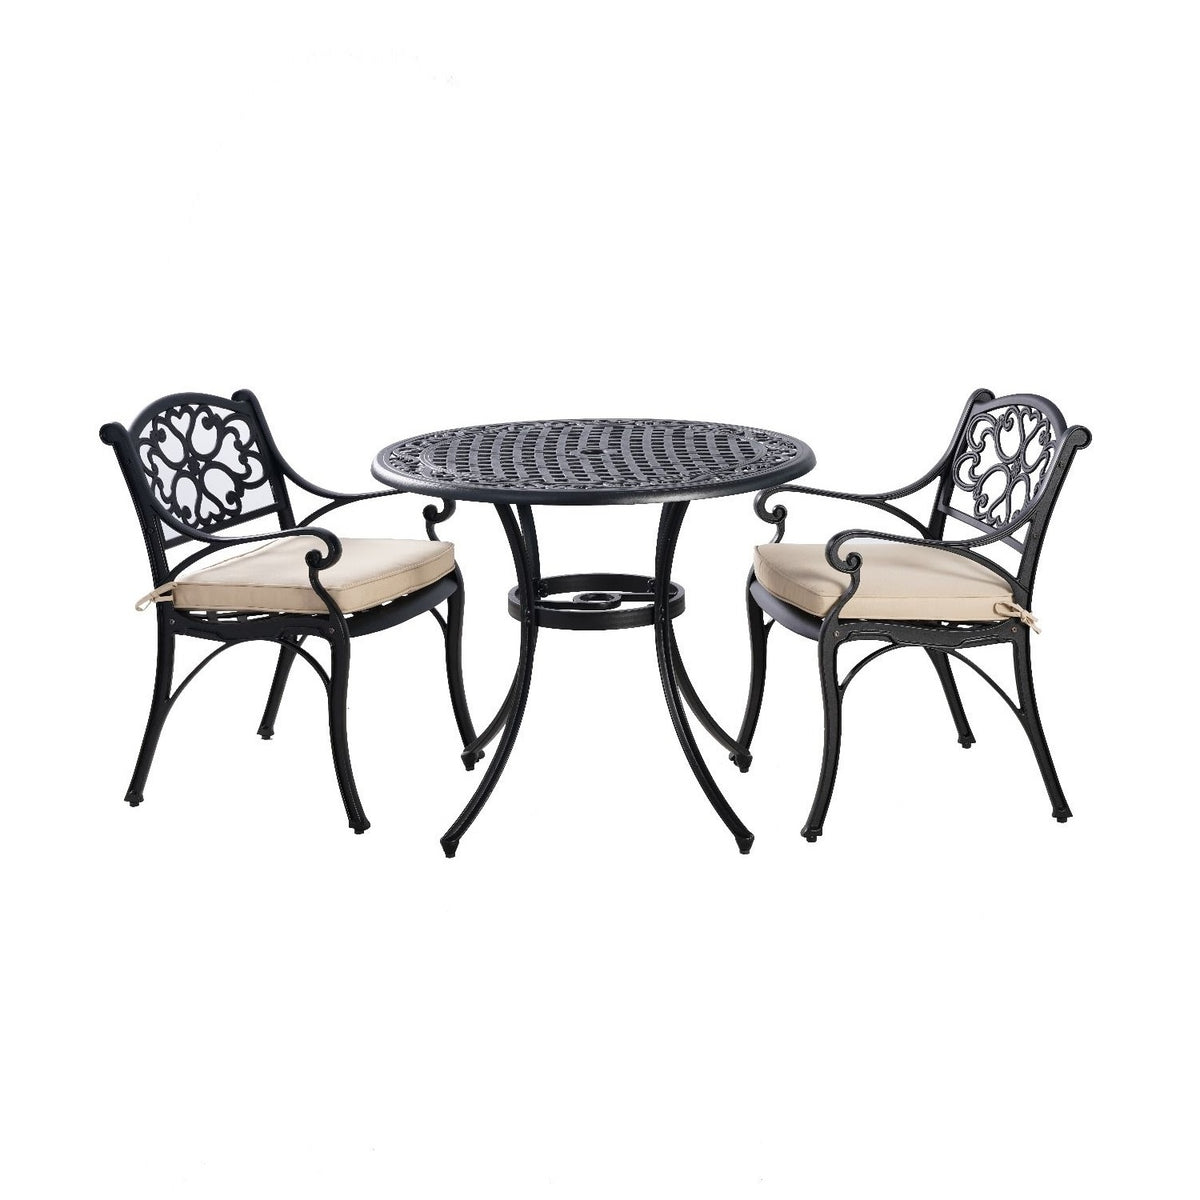 Set of 3 Marco Round Outdoor Dining Table with Chairs - Black - Notbrand